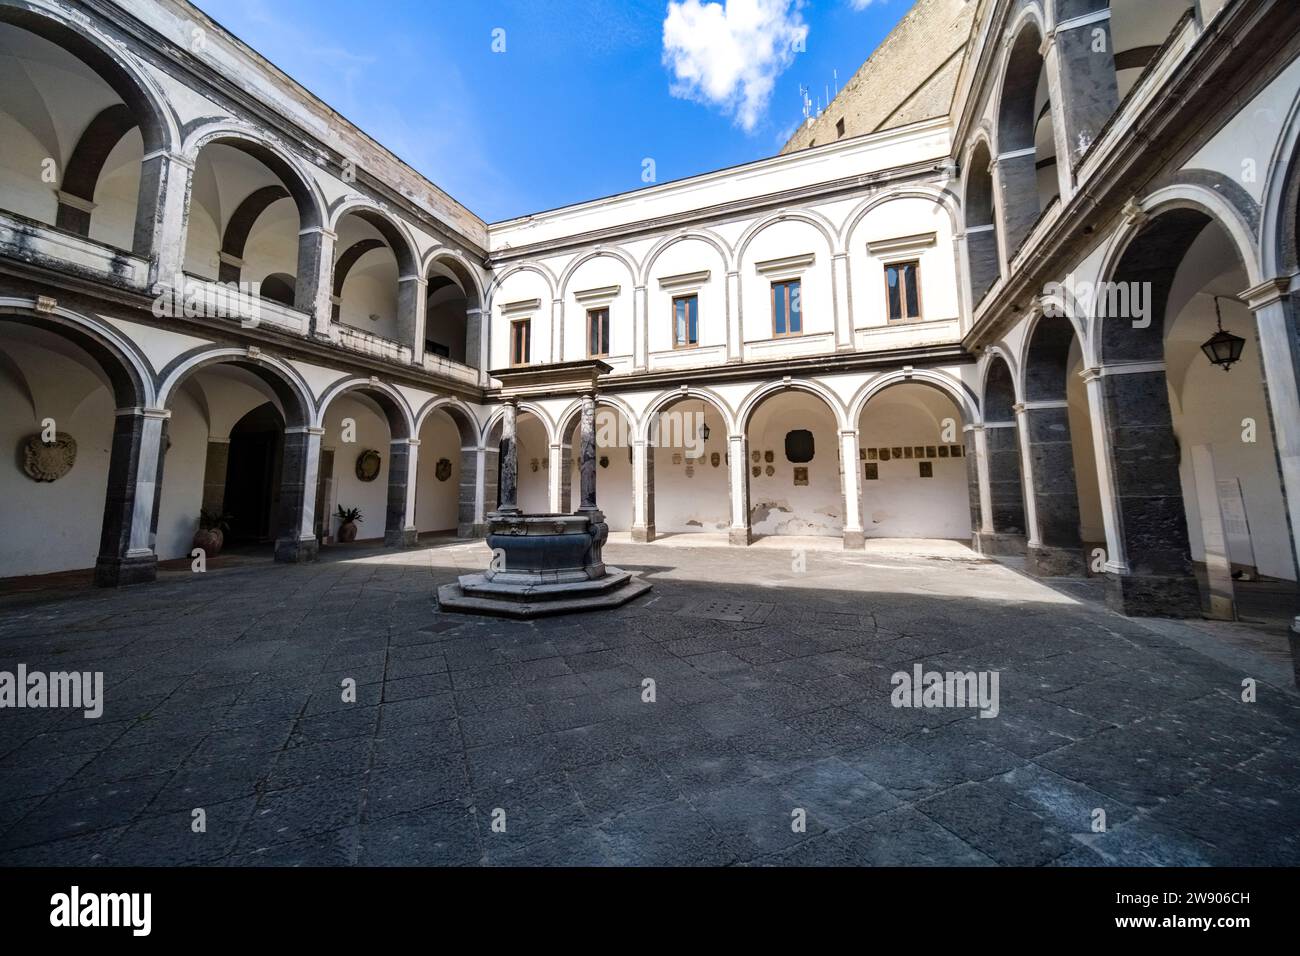 Small inner courtyard and cloister of the former Carthusian monastery Certosa di San Martino, situated on a hill high above the town. Stock Photo